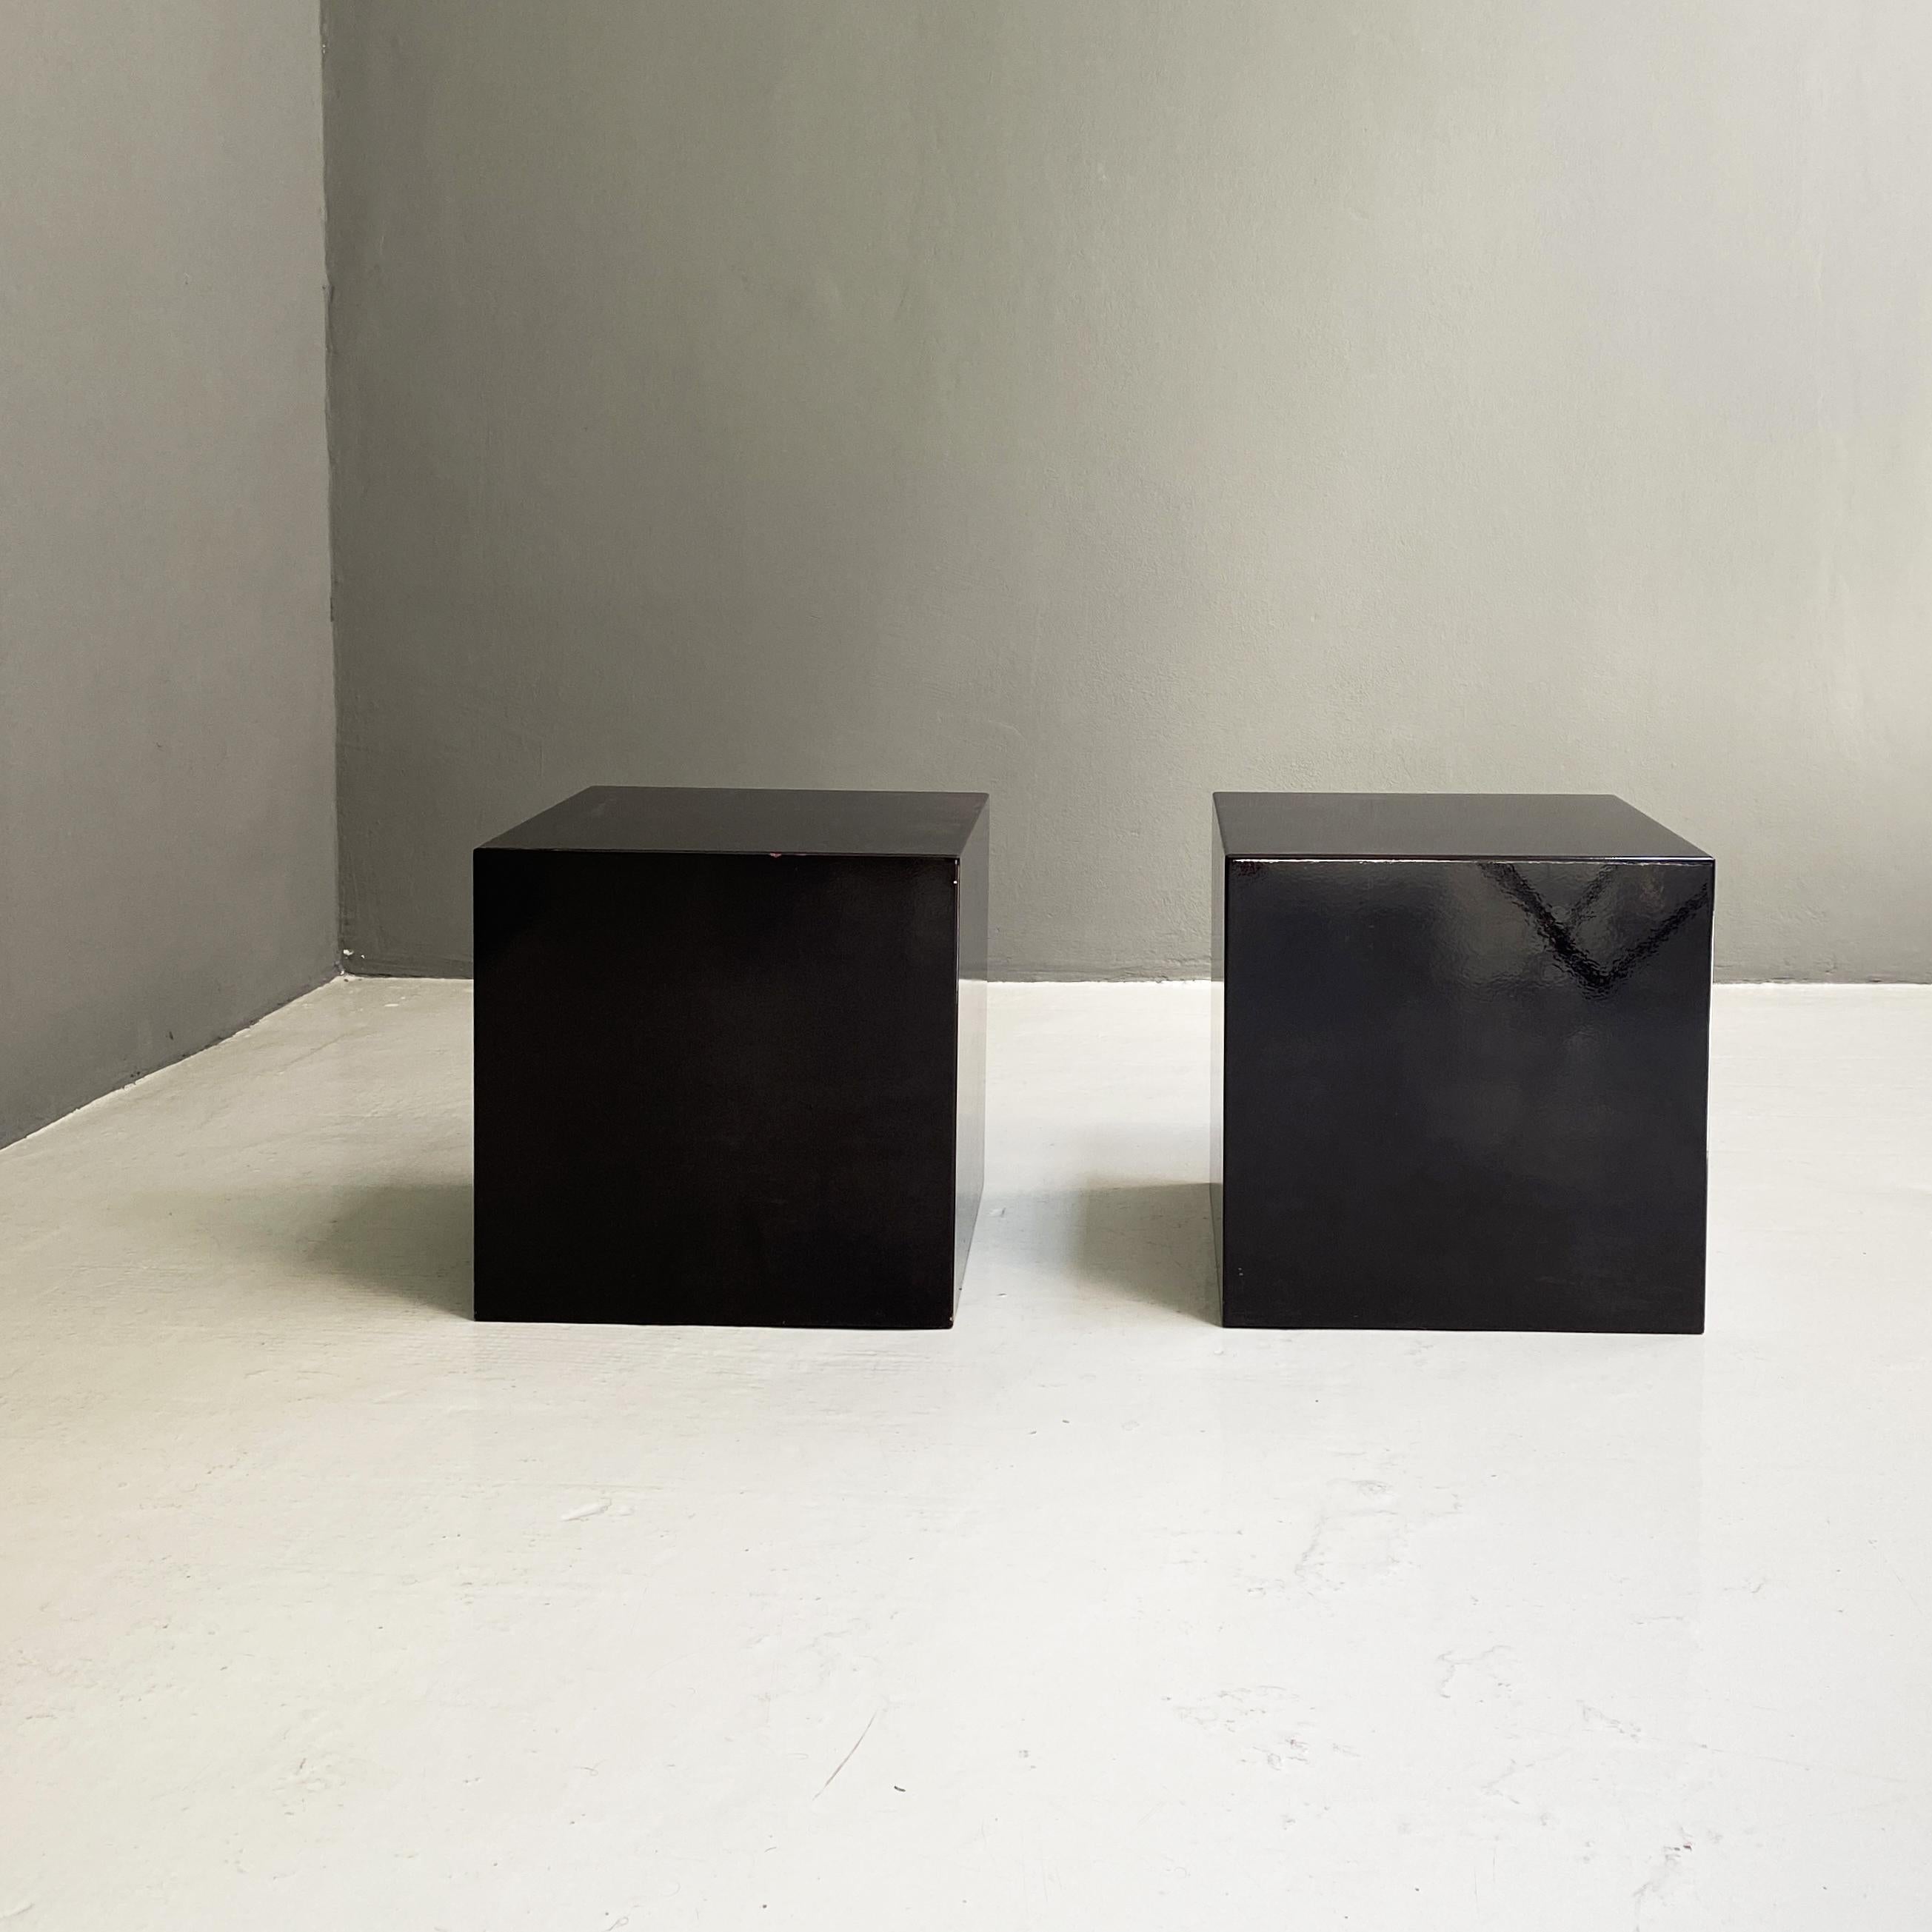 Cube-shaped coffee tables or bedside tables or night table or stool in dark brown lacquered wood, 1990s
Dark brown lacquered wooden cubes, usable as bedside tables, tables or displays.
The can be use as a pedestal for a sculptures or like a small